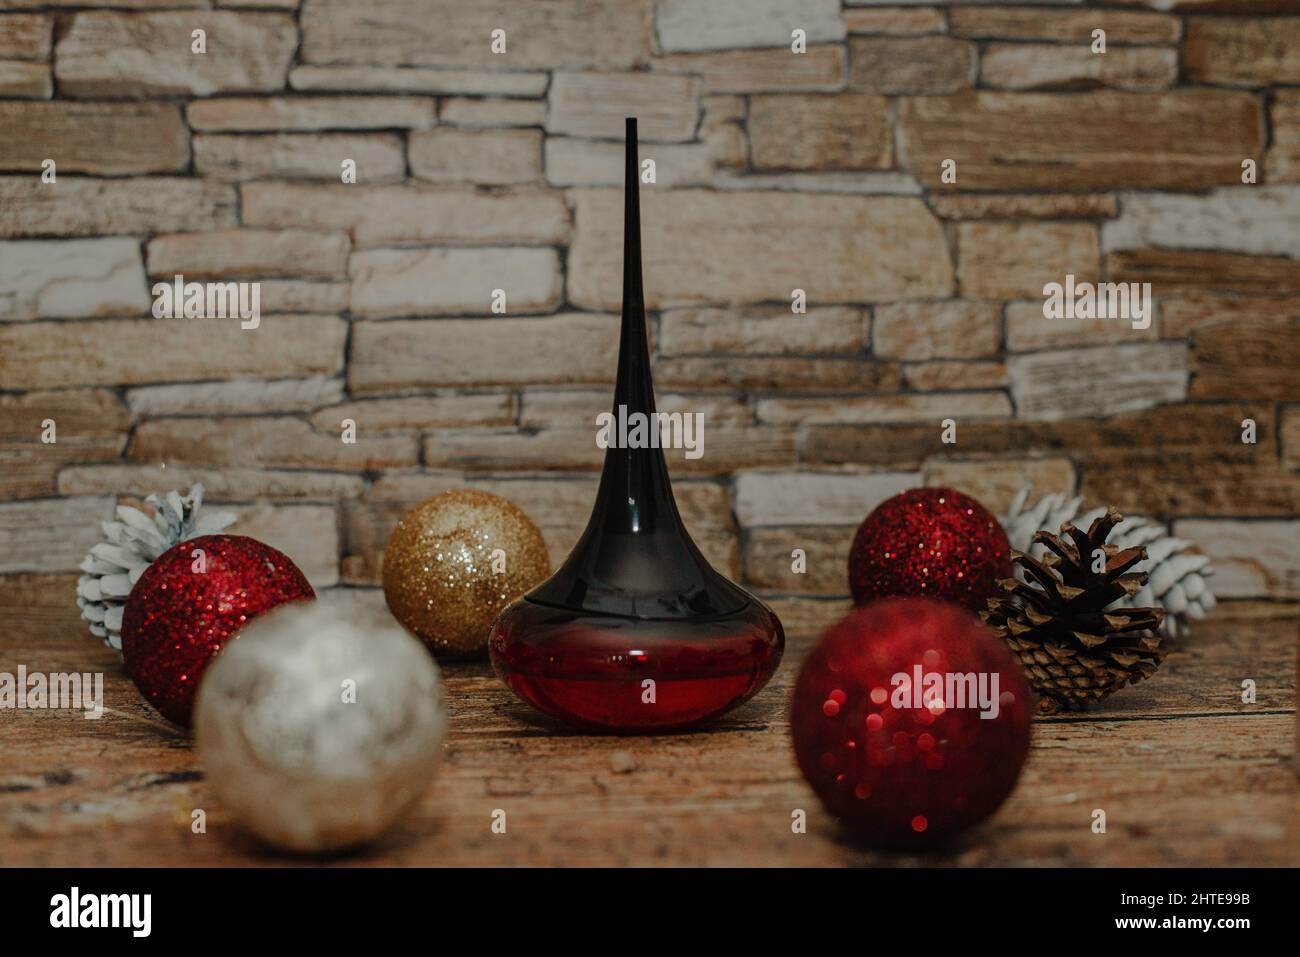 Perfume flacon with winter holiday decorations on the background Stock Photo